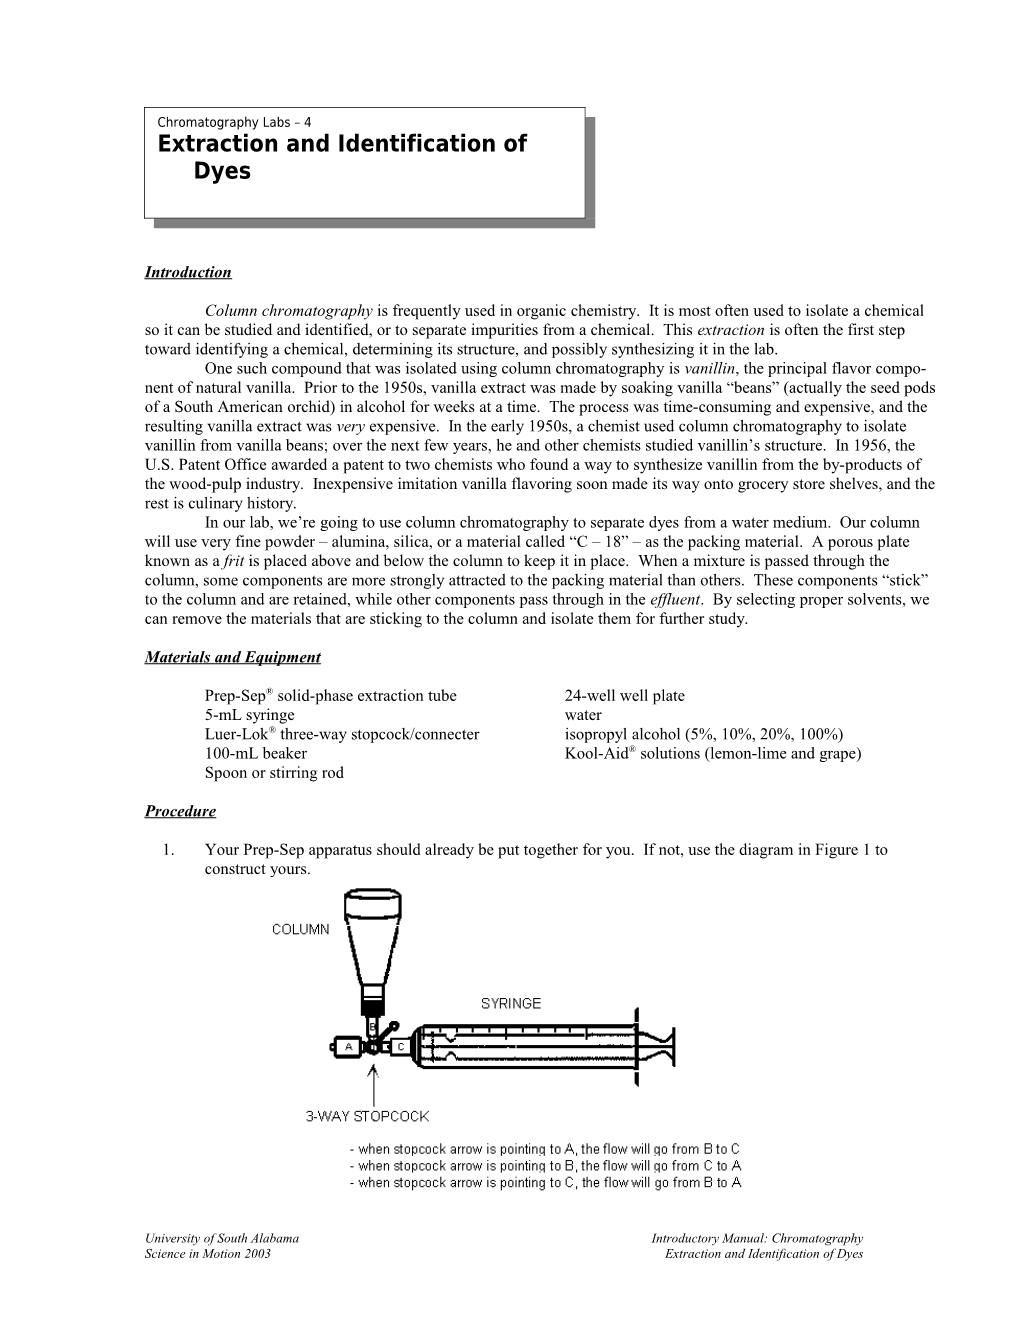 Chromatography 4 Extraction and Identification of Dyes 3